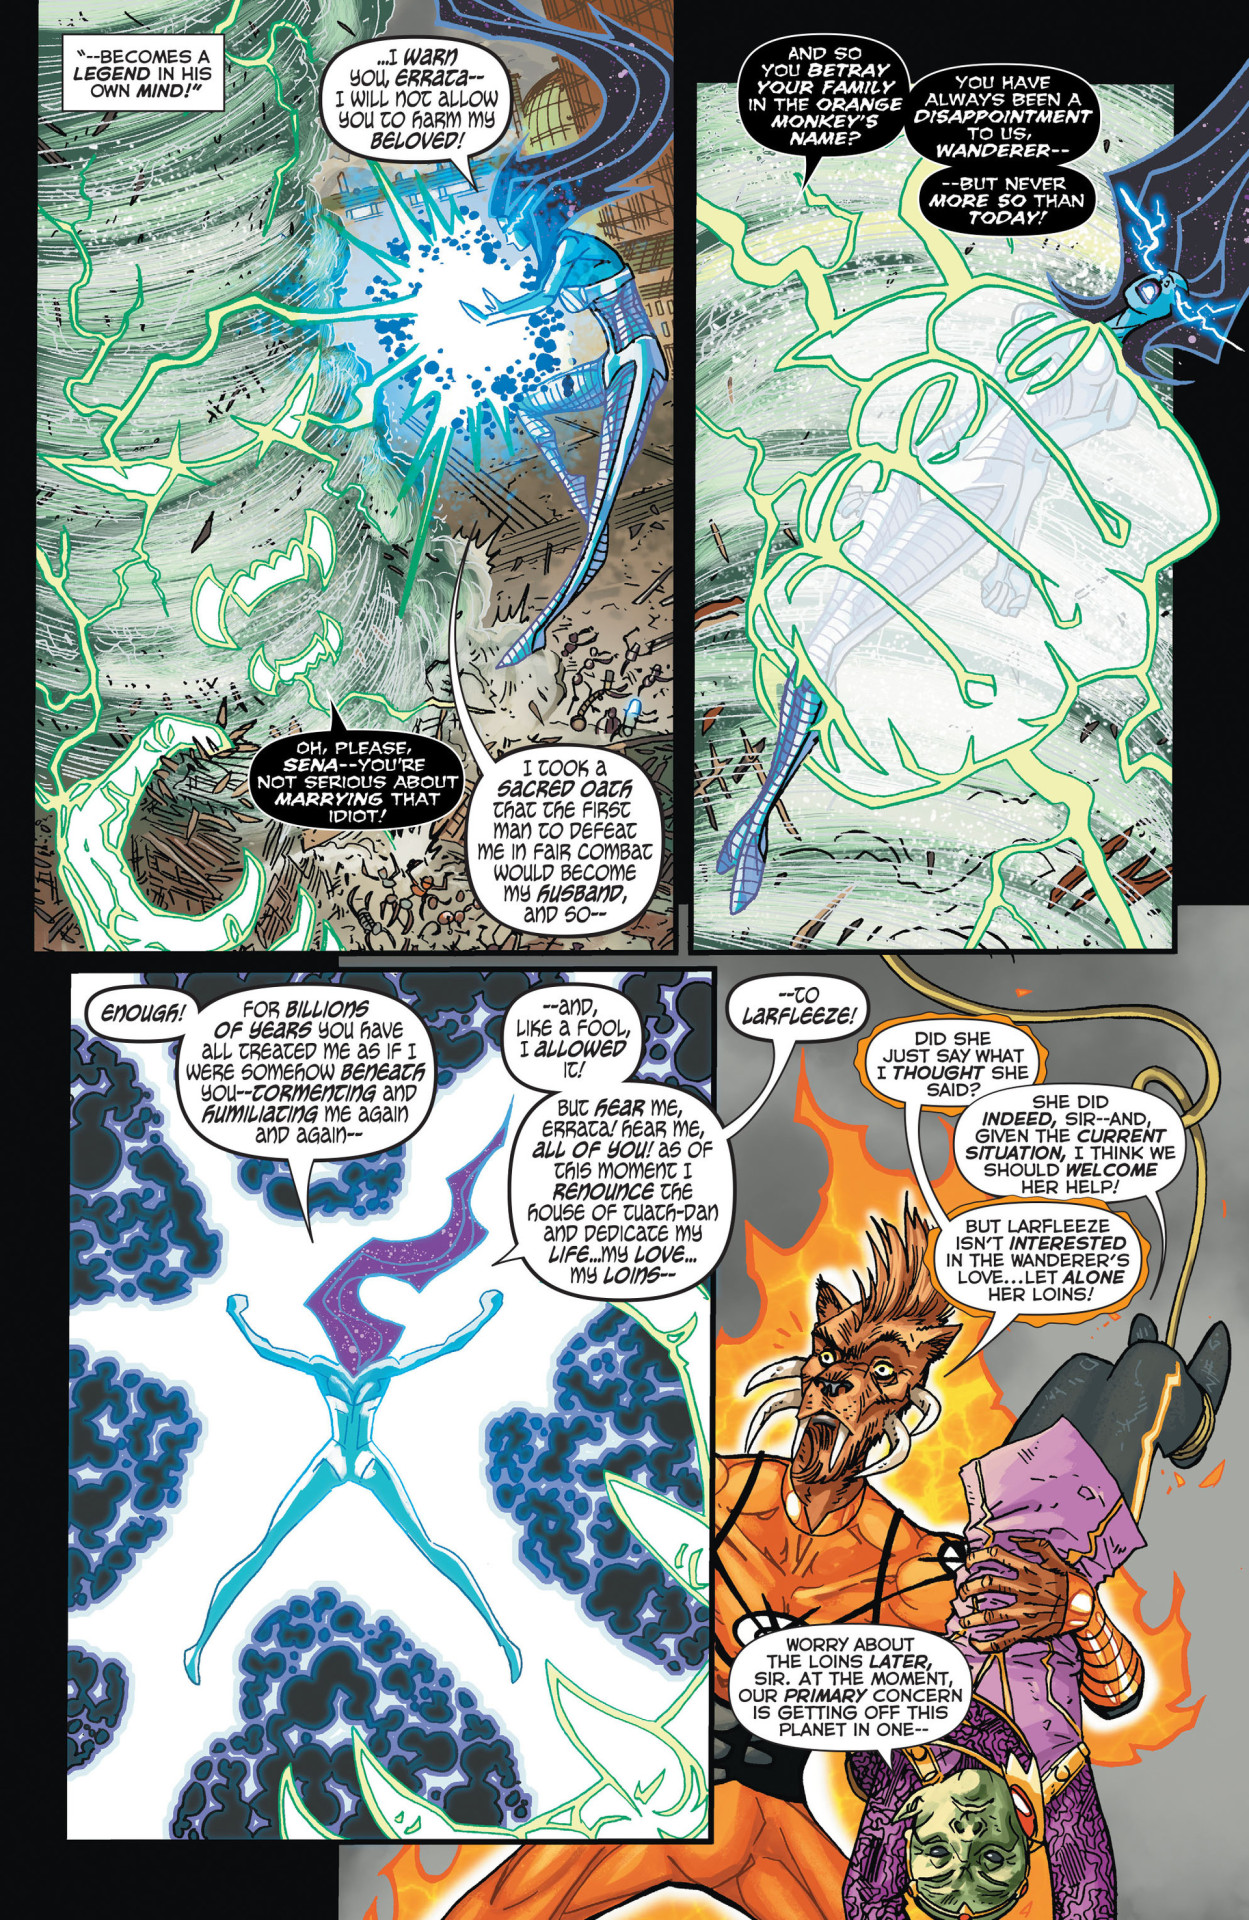 Larfleeze encounters one of the few things in all of existence that for all of his